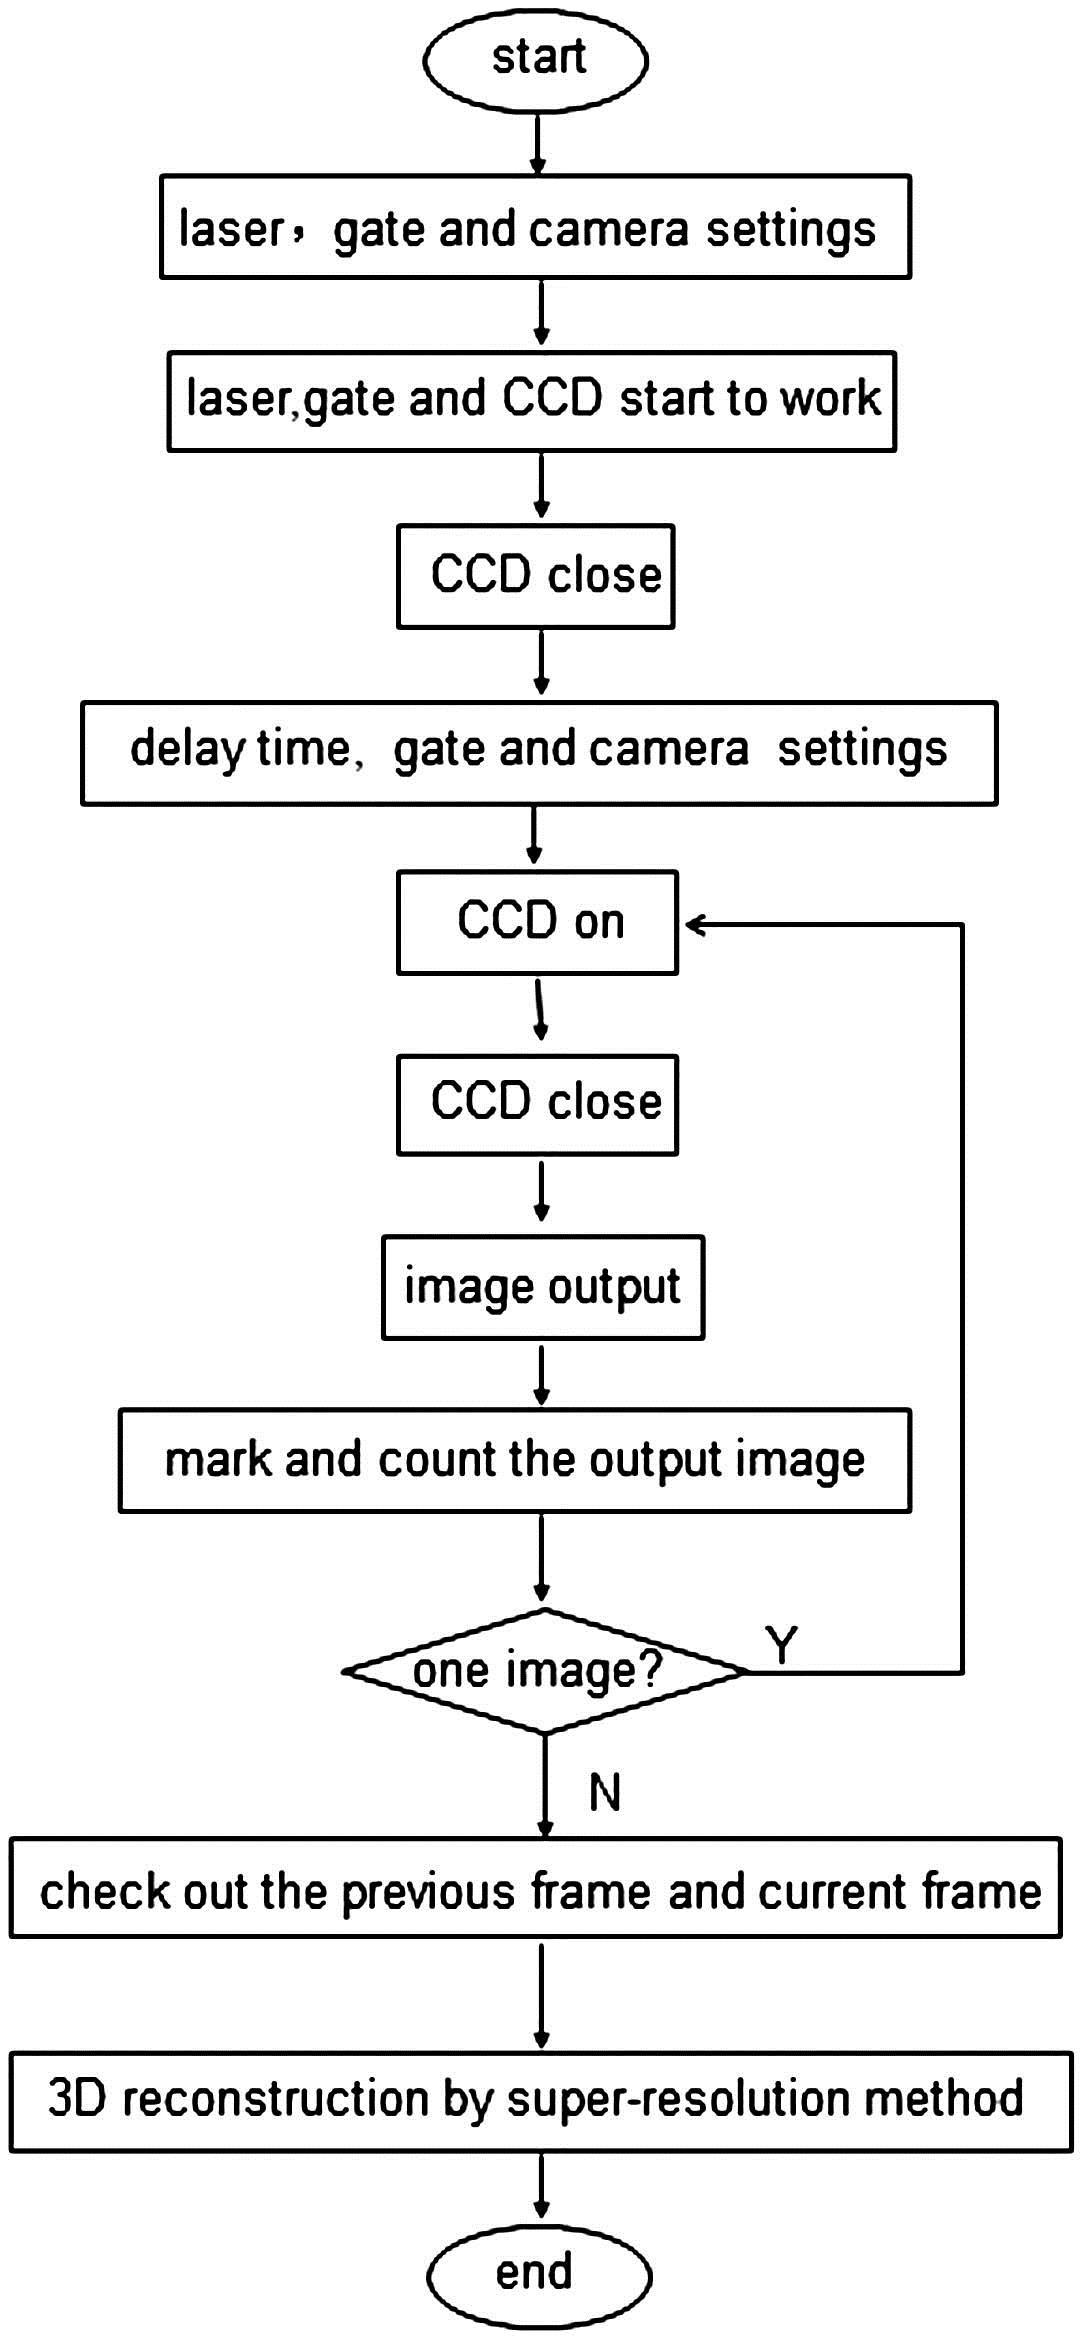 Flow chart of the time-coding real-time 3DSRRGI.